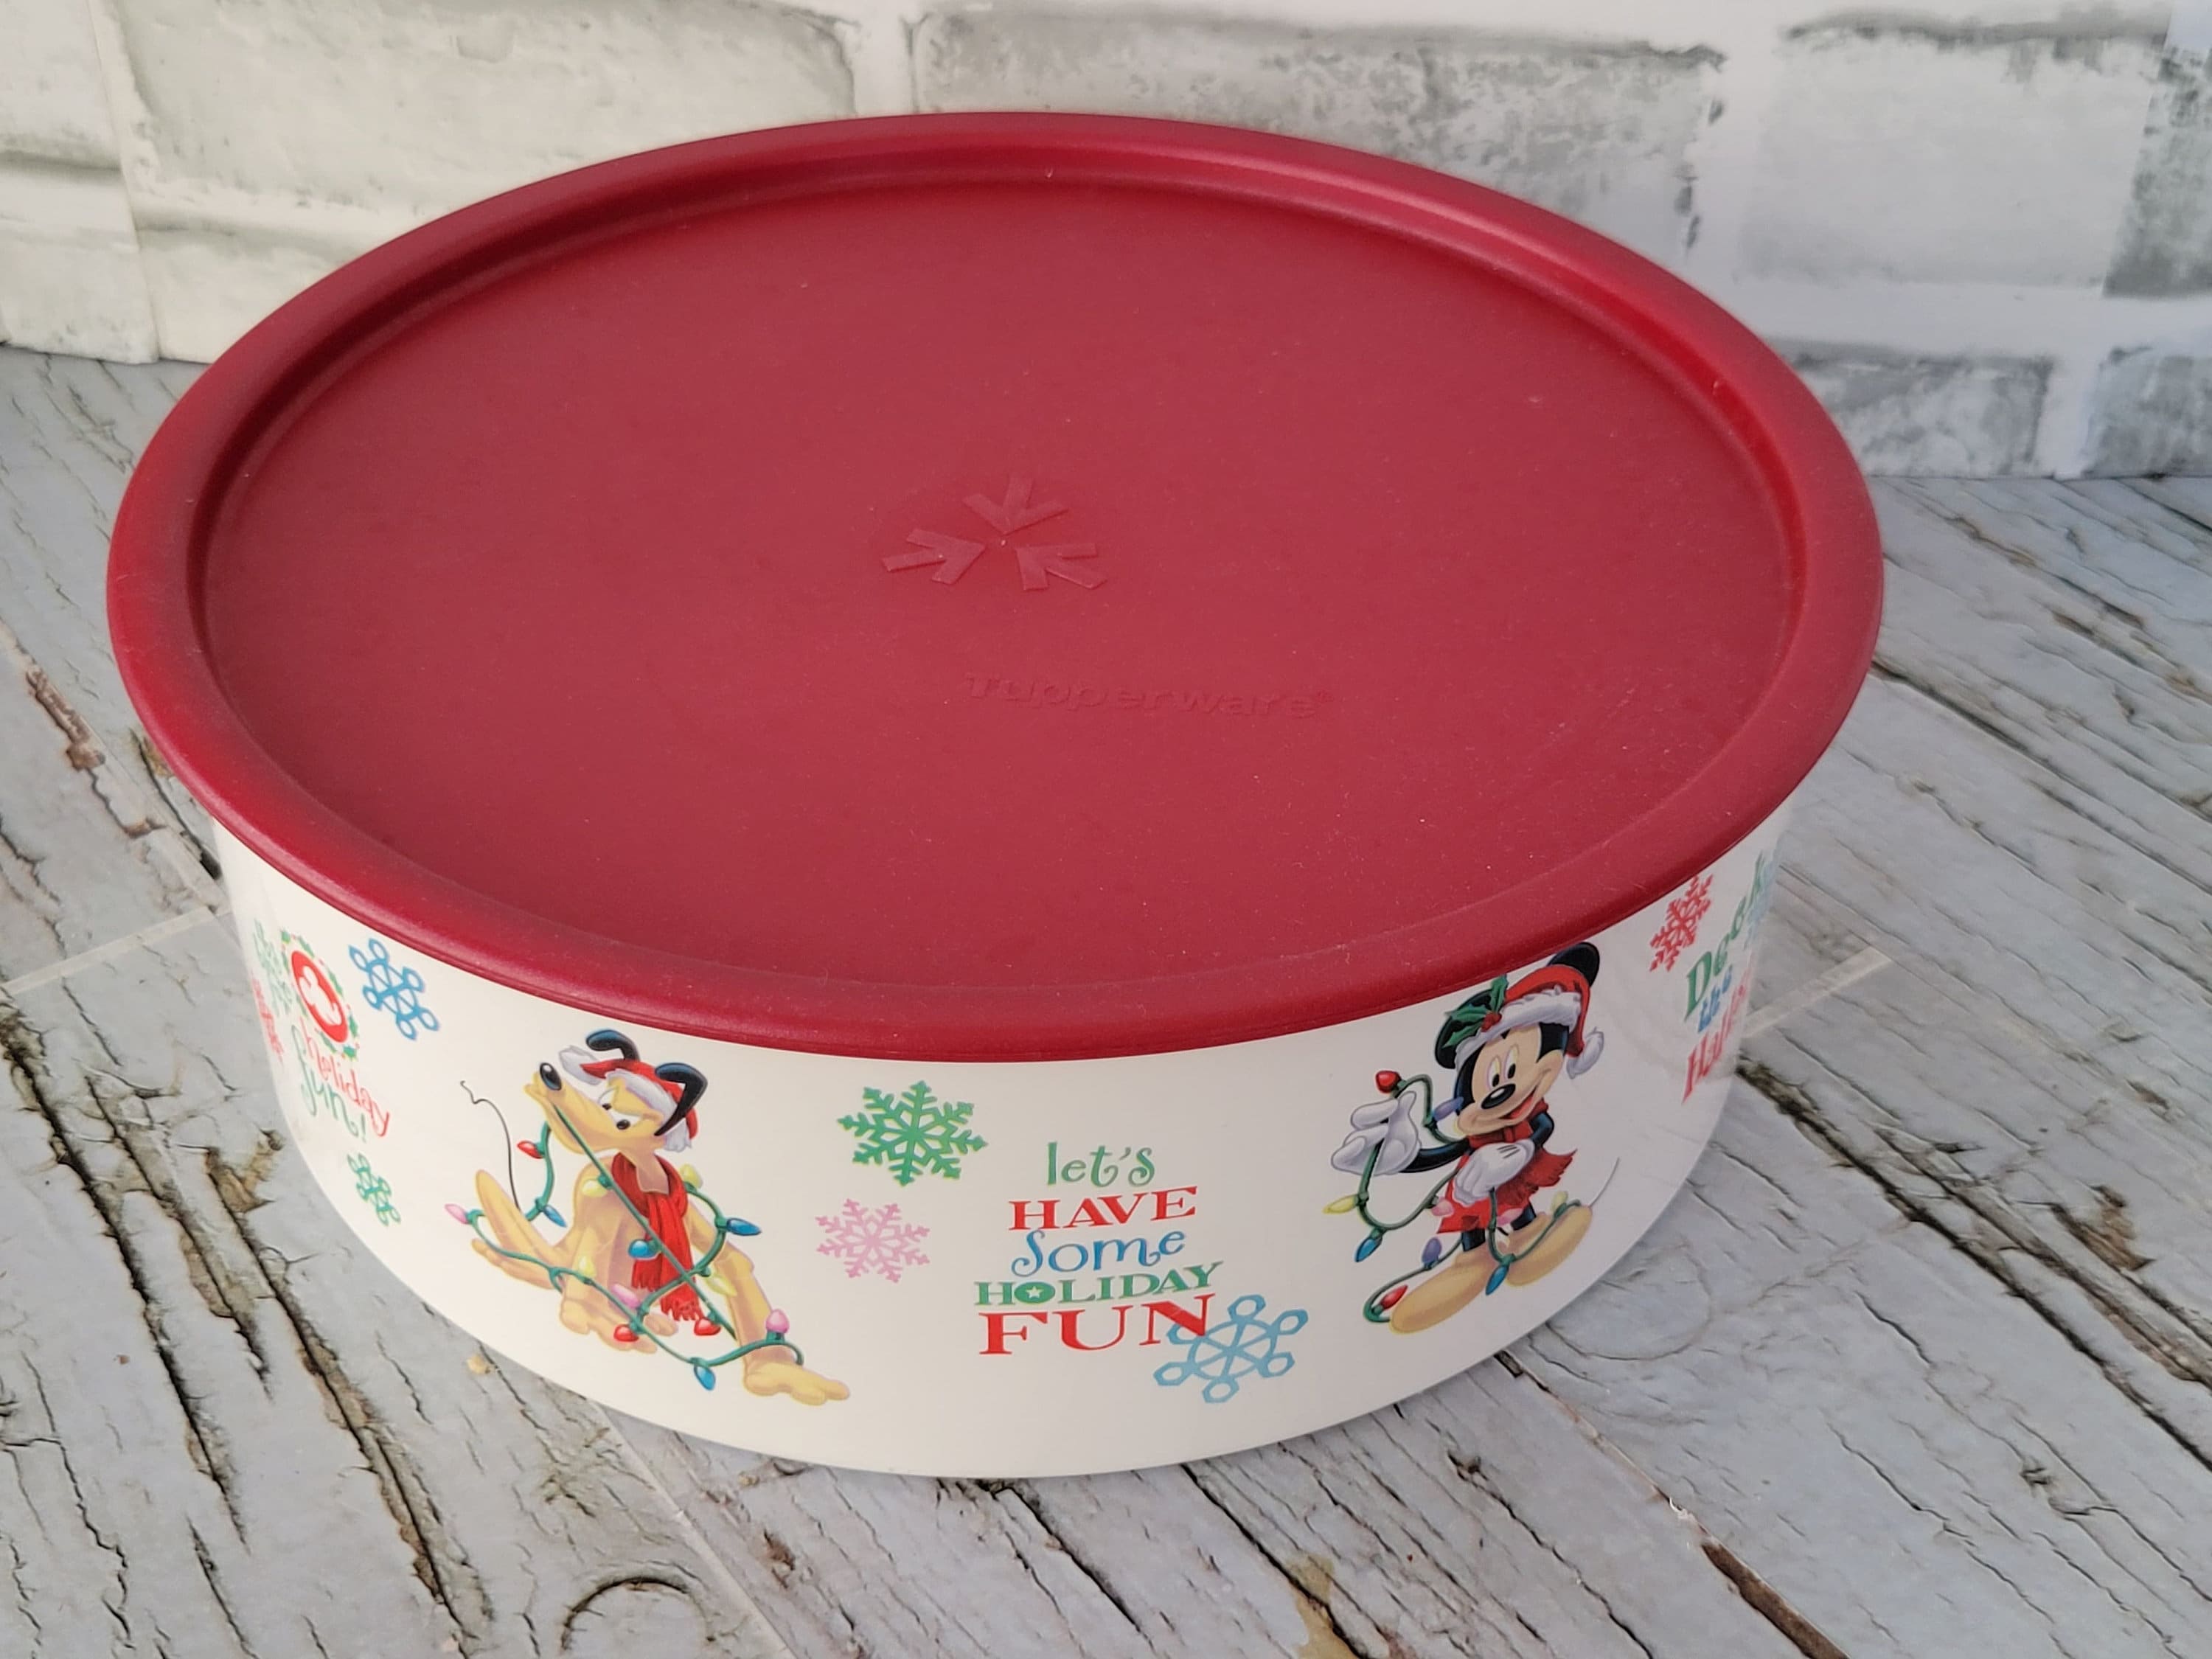 Vintage Tupperware Cake/Cookie Storage Container Red Cover (11x7x2) – Main  Street Estate Sales